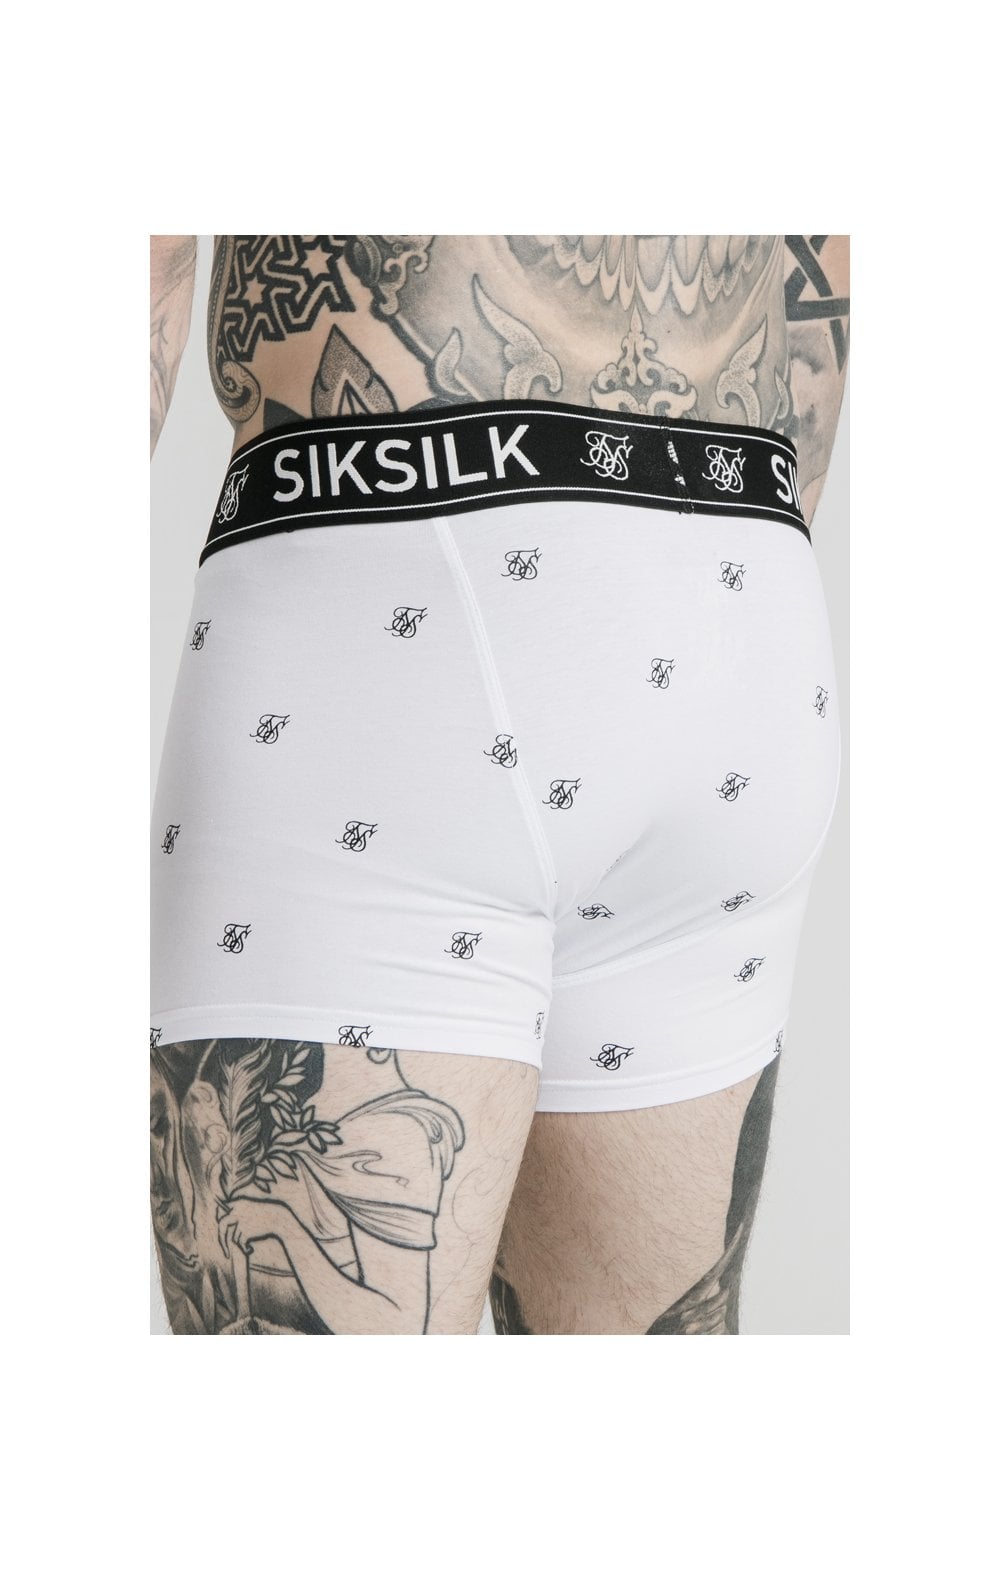 Load image into Gallery viewer, SikSilk Logo Taped Boxer Shorts (2 Pack) - White &amp; Black Pack of 2 Boxers - 1 White pair and 1 Black pair (6)